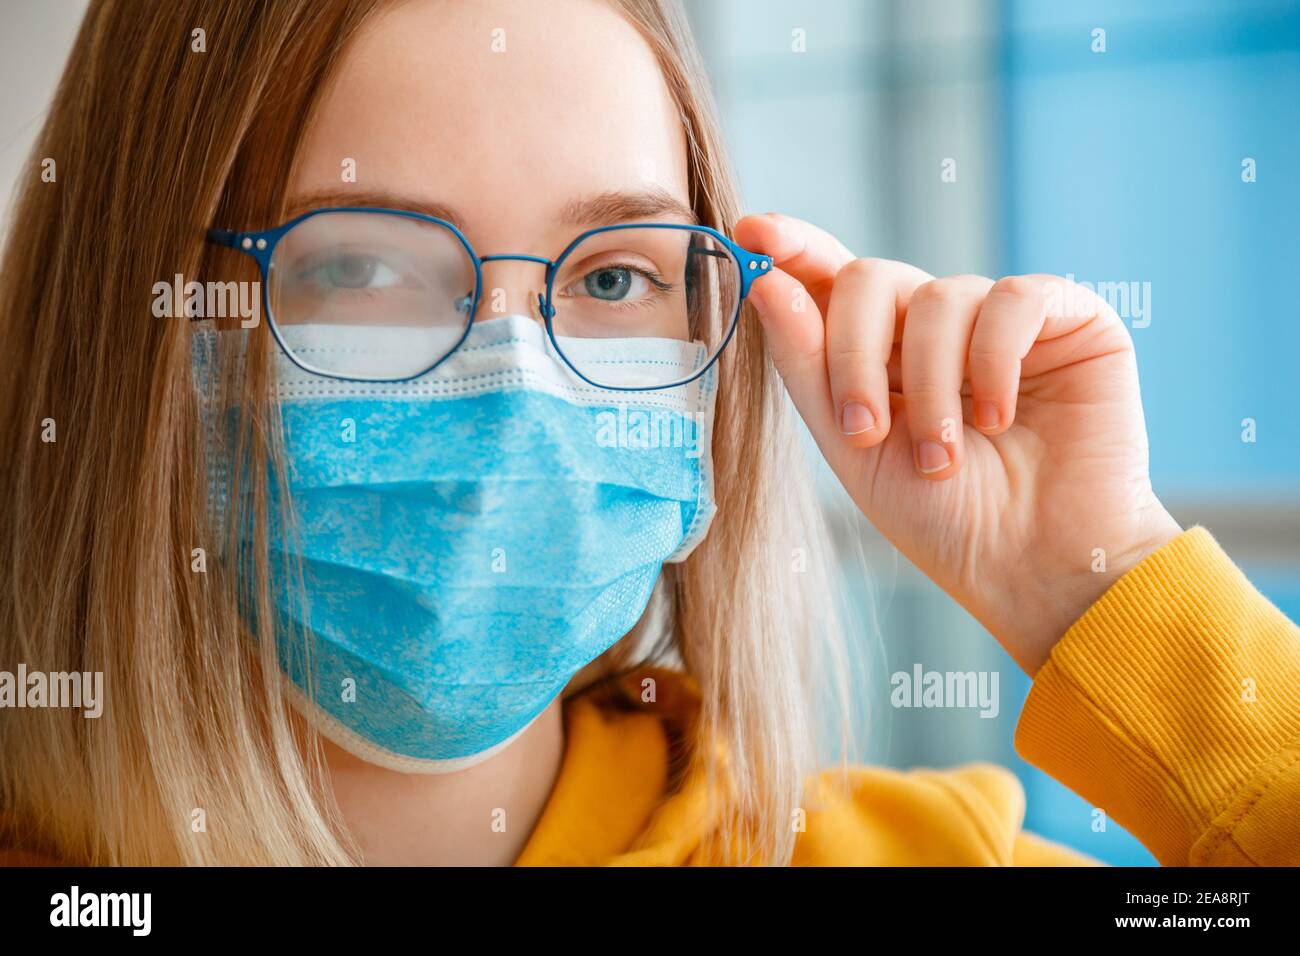 Foggy glasses wearing on young woman. close up portrait. Teenager girl in blue medical protective face mask and eyeglasses wipes blurred foggy misted Stock Photo